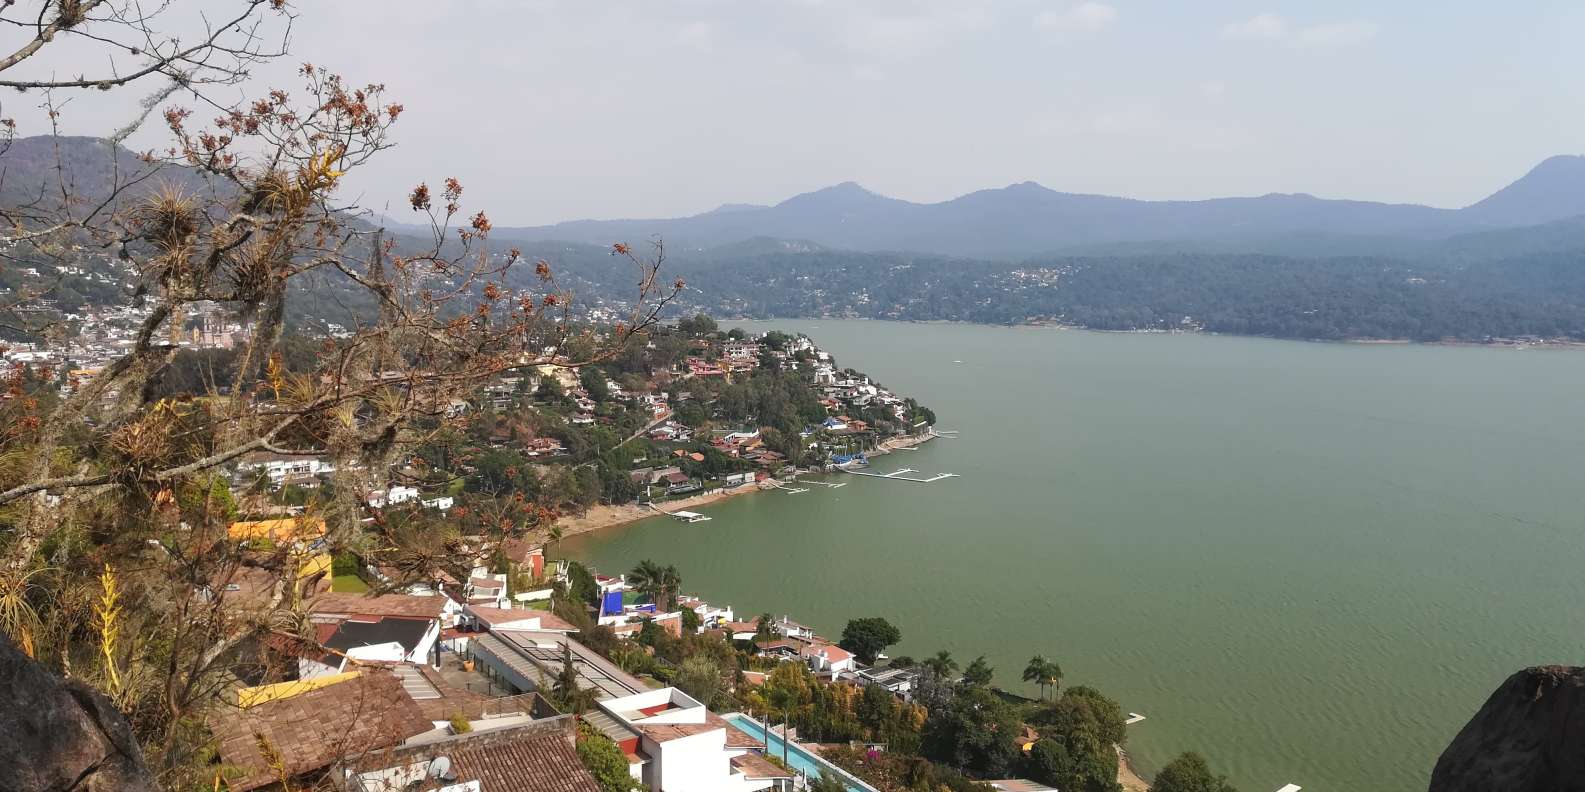 What to do in Valle de Bravo